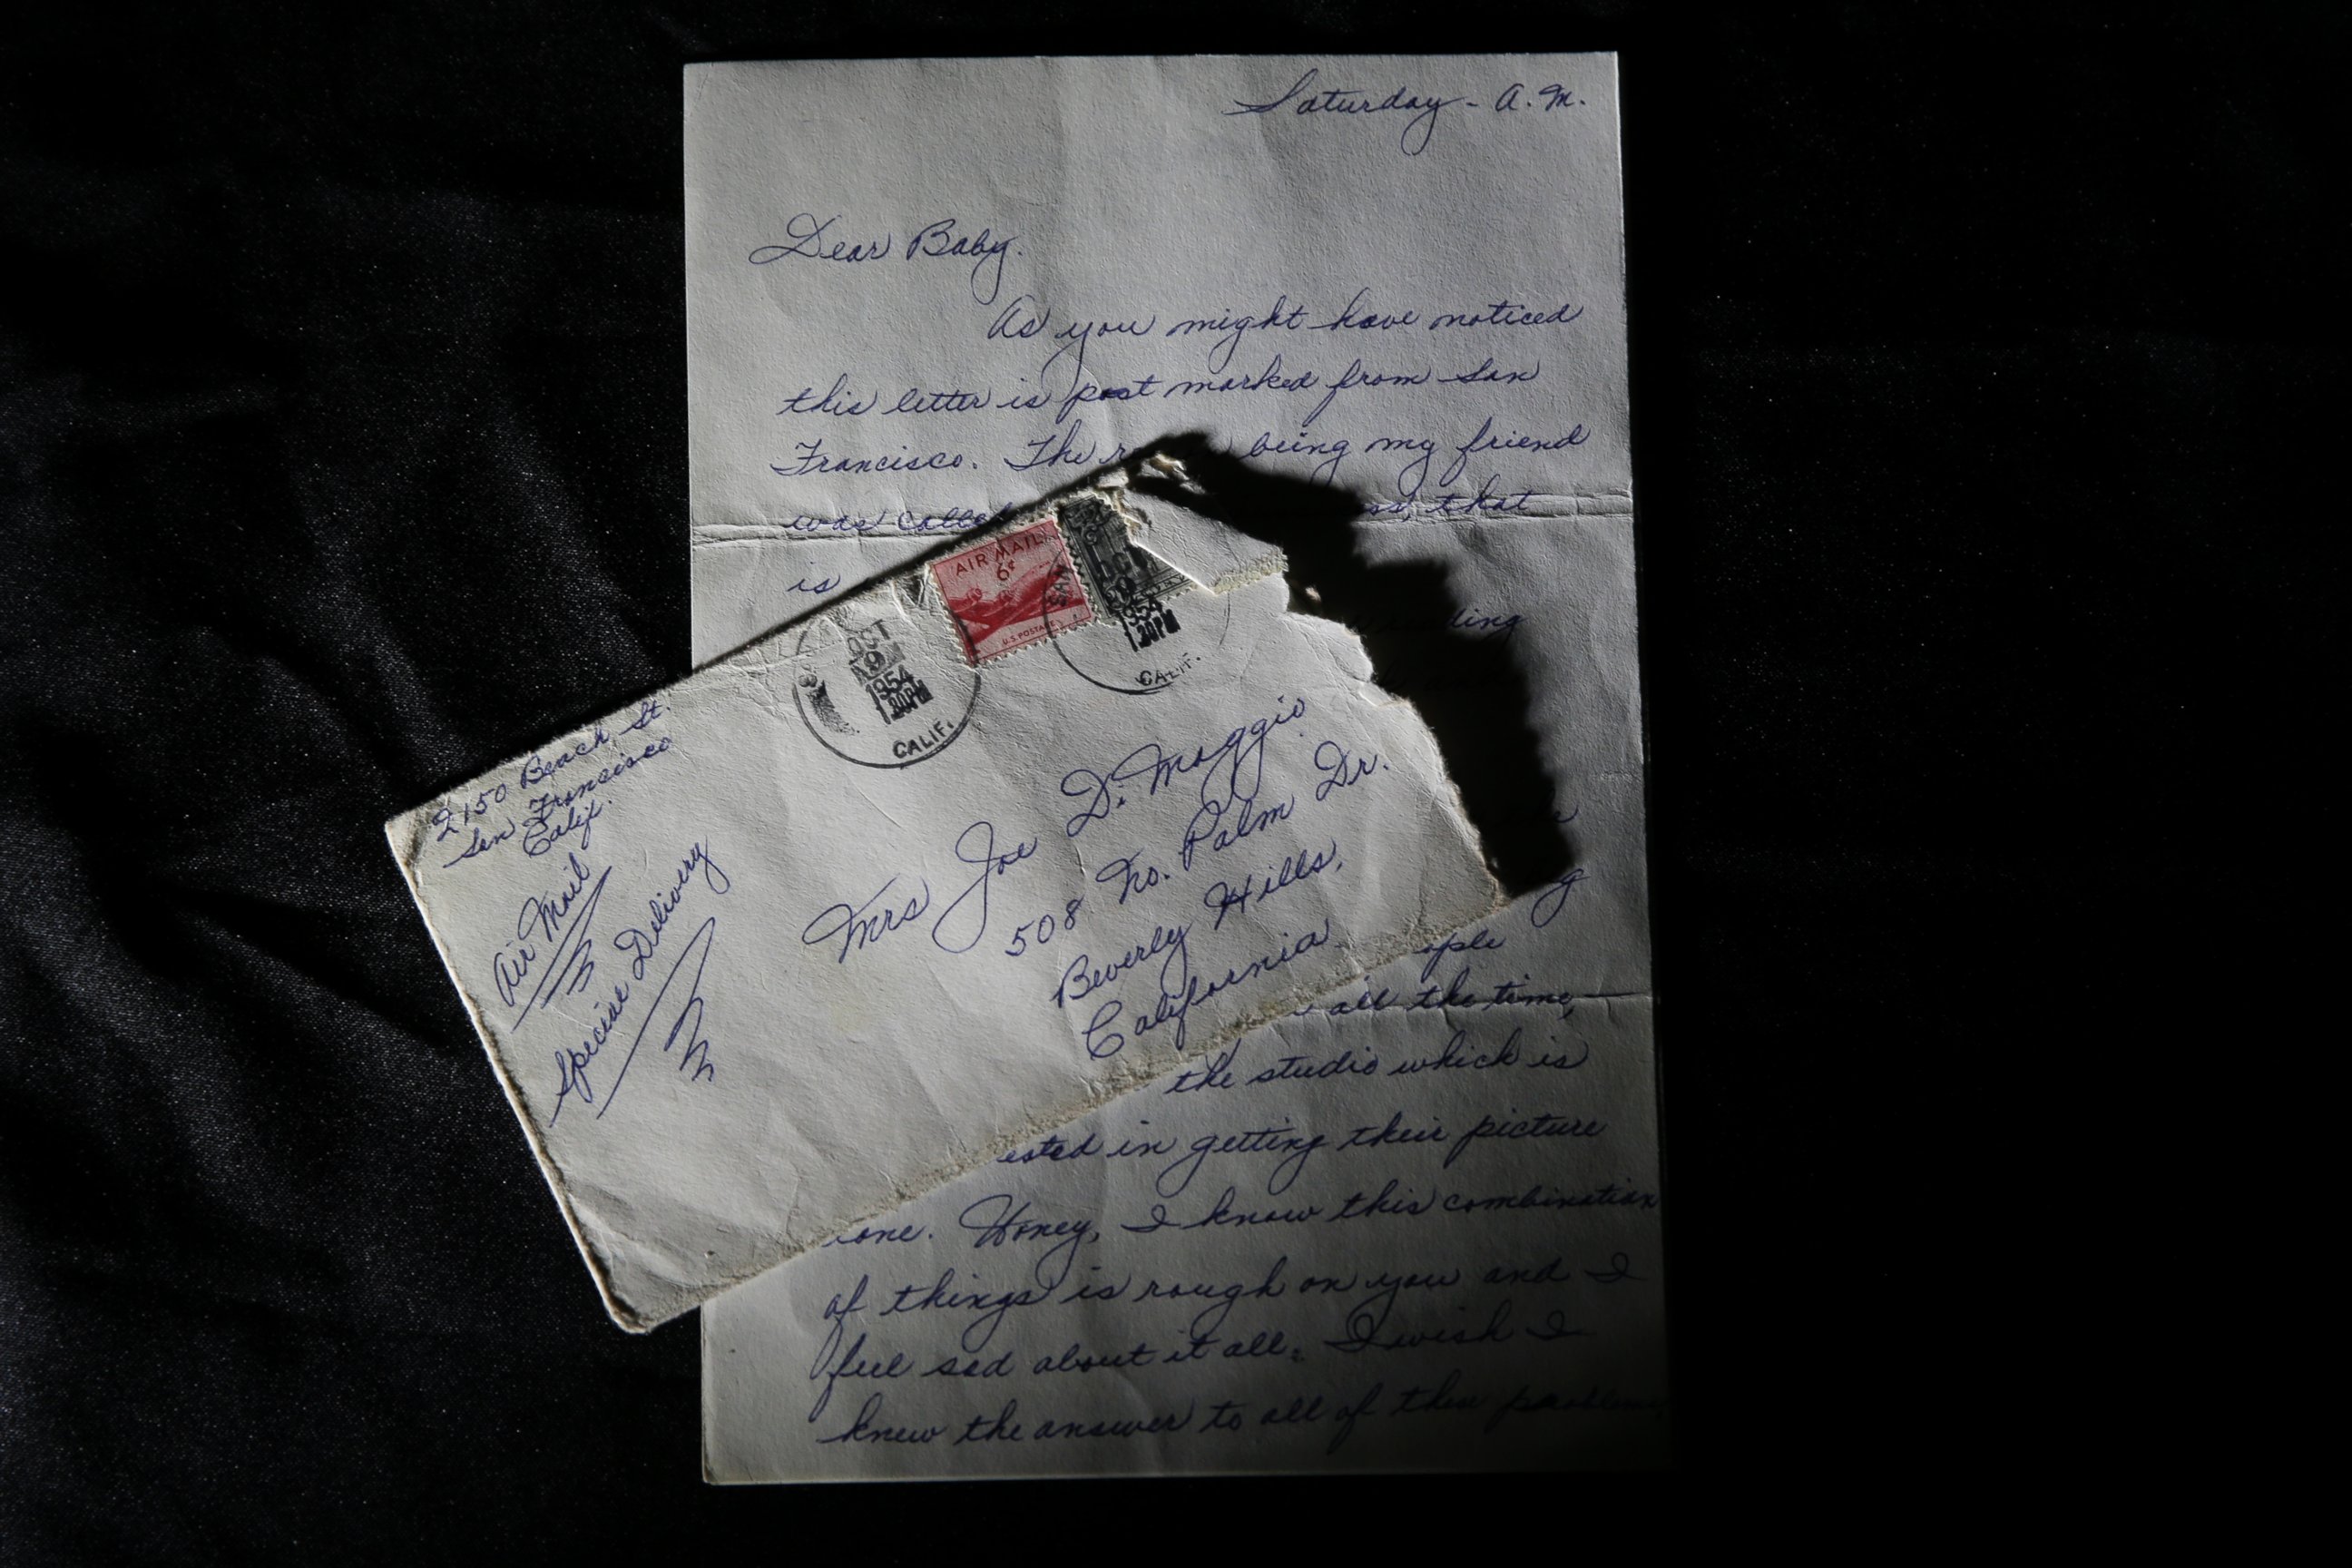 PHOTO: This Nov. 7, 2014 photo shows part of a three-page handwritten letter and original envelope postmarked Oct. 9, 1954 from baseball legend Joe DiMaggio to Marilyn Monroe on display at Julien's Auctions in Beverly Hills, Calif.  